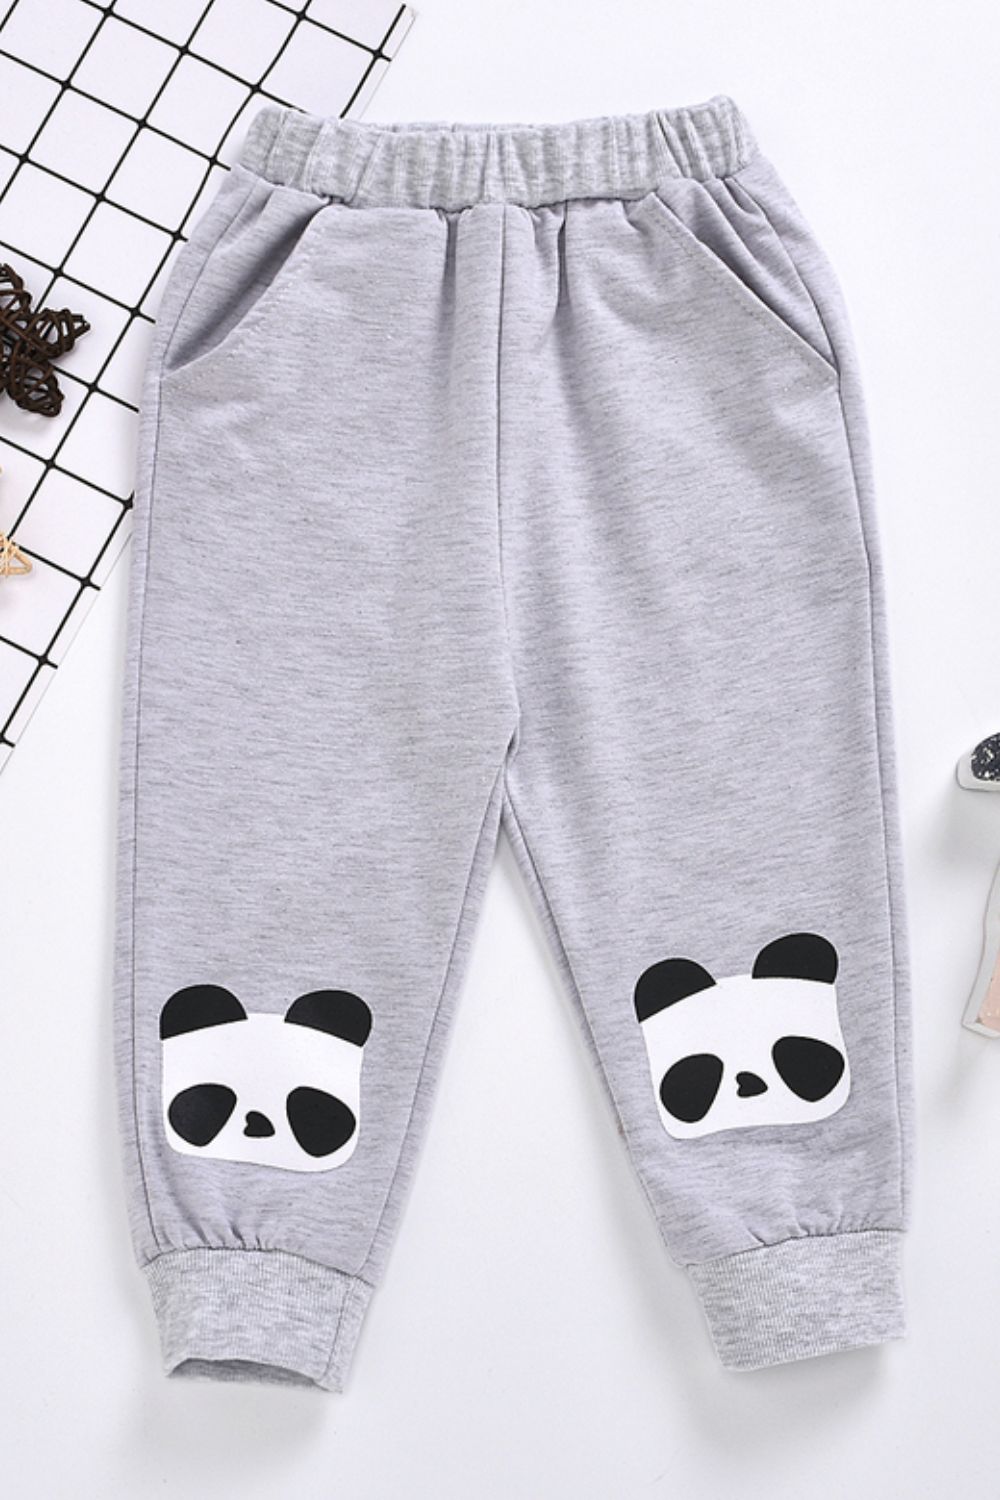 LIGHT GRAY Kids Panda Graphic Joggers with Pockets - toddler's pants at TFC&H Co.